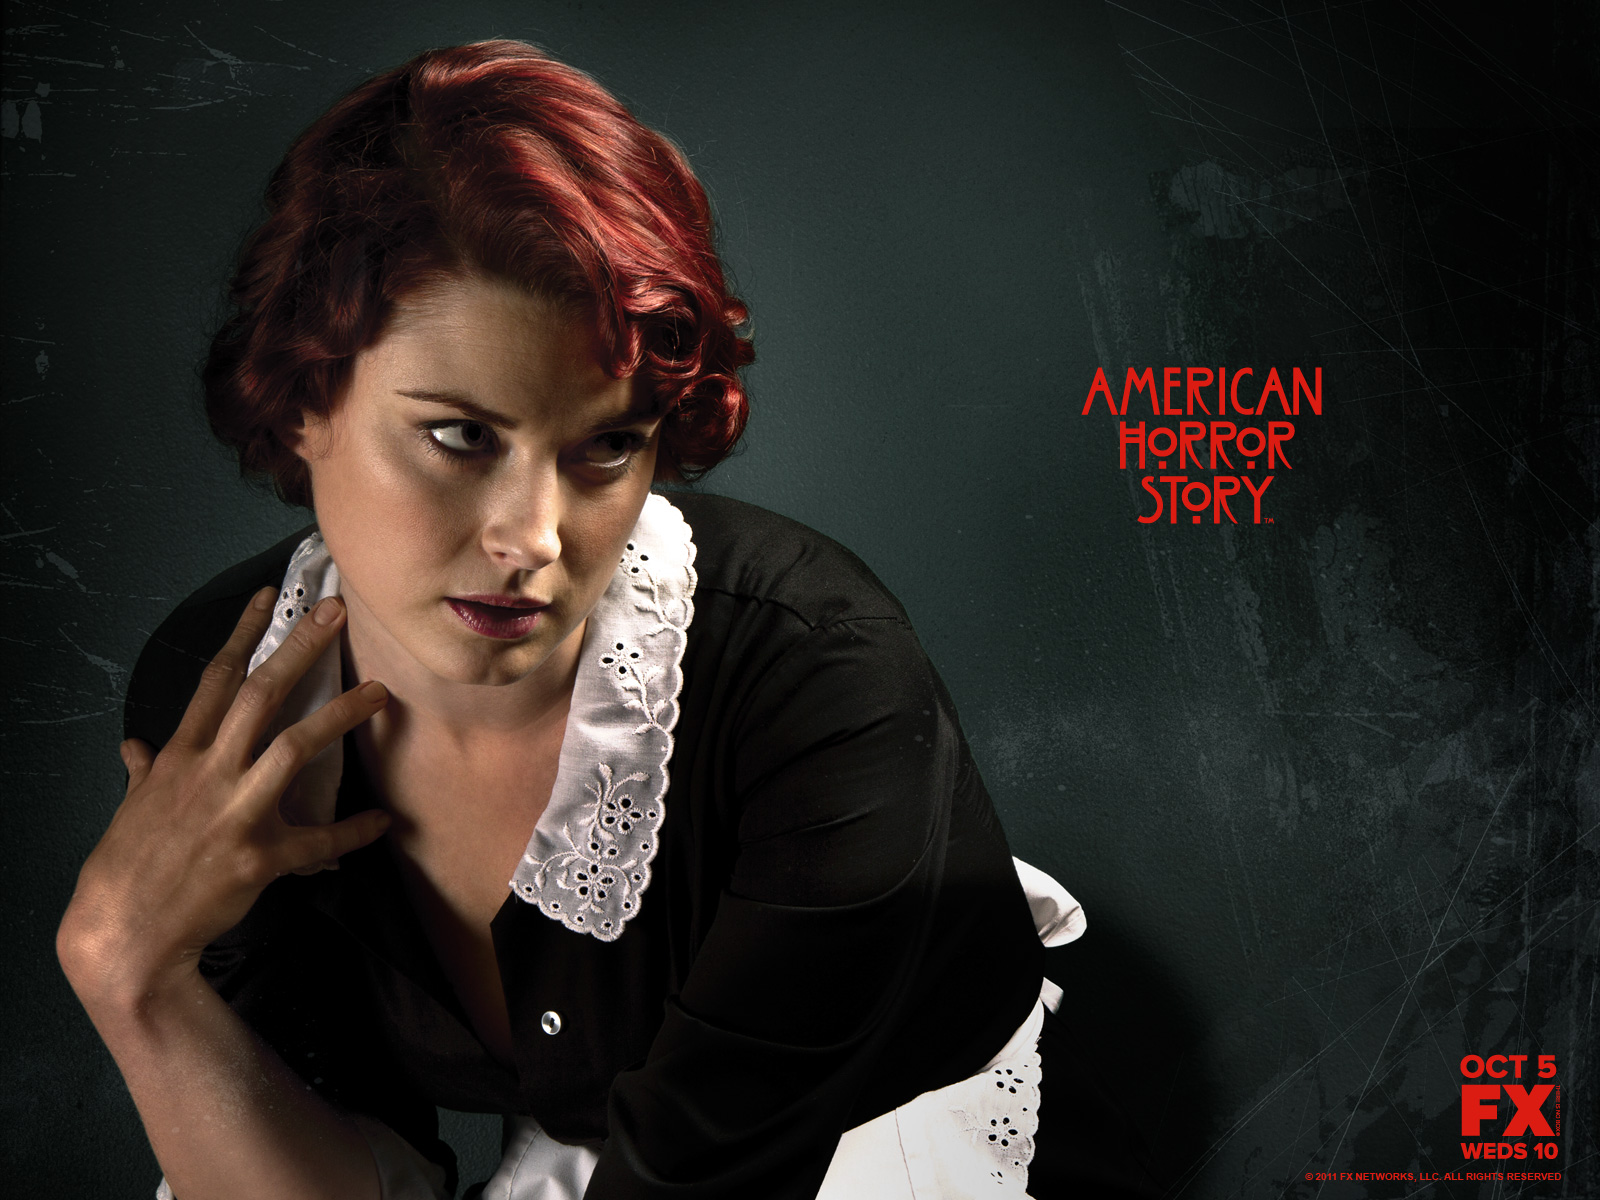 Download High quality American Horror Story wallpaper / Movies / 1600x1200